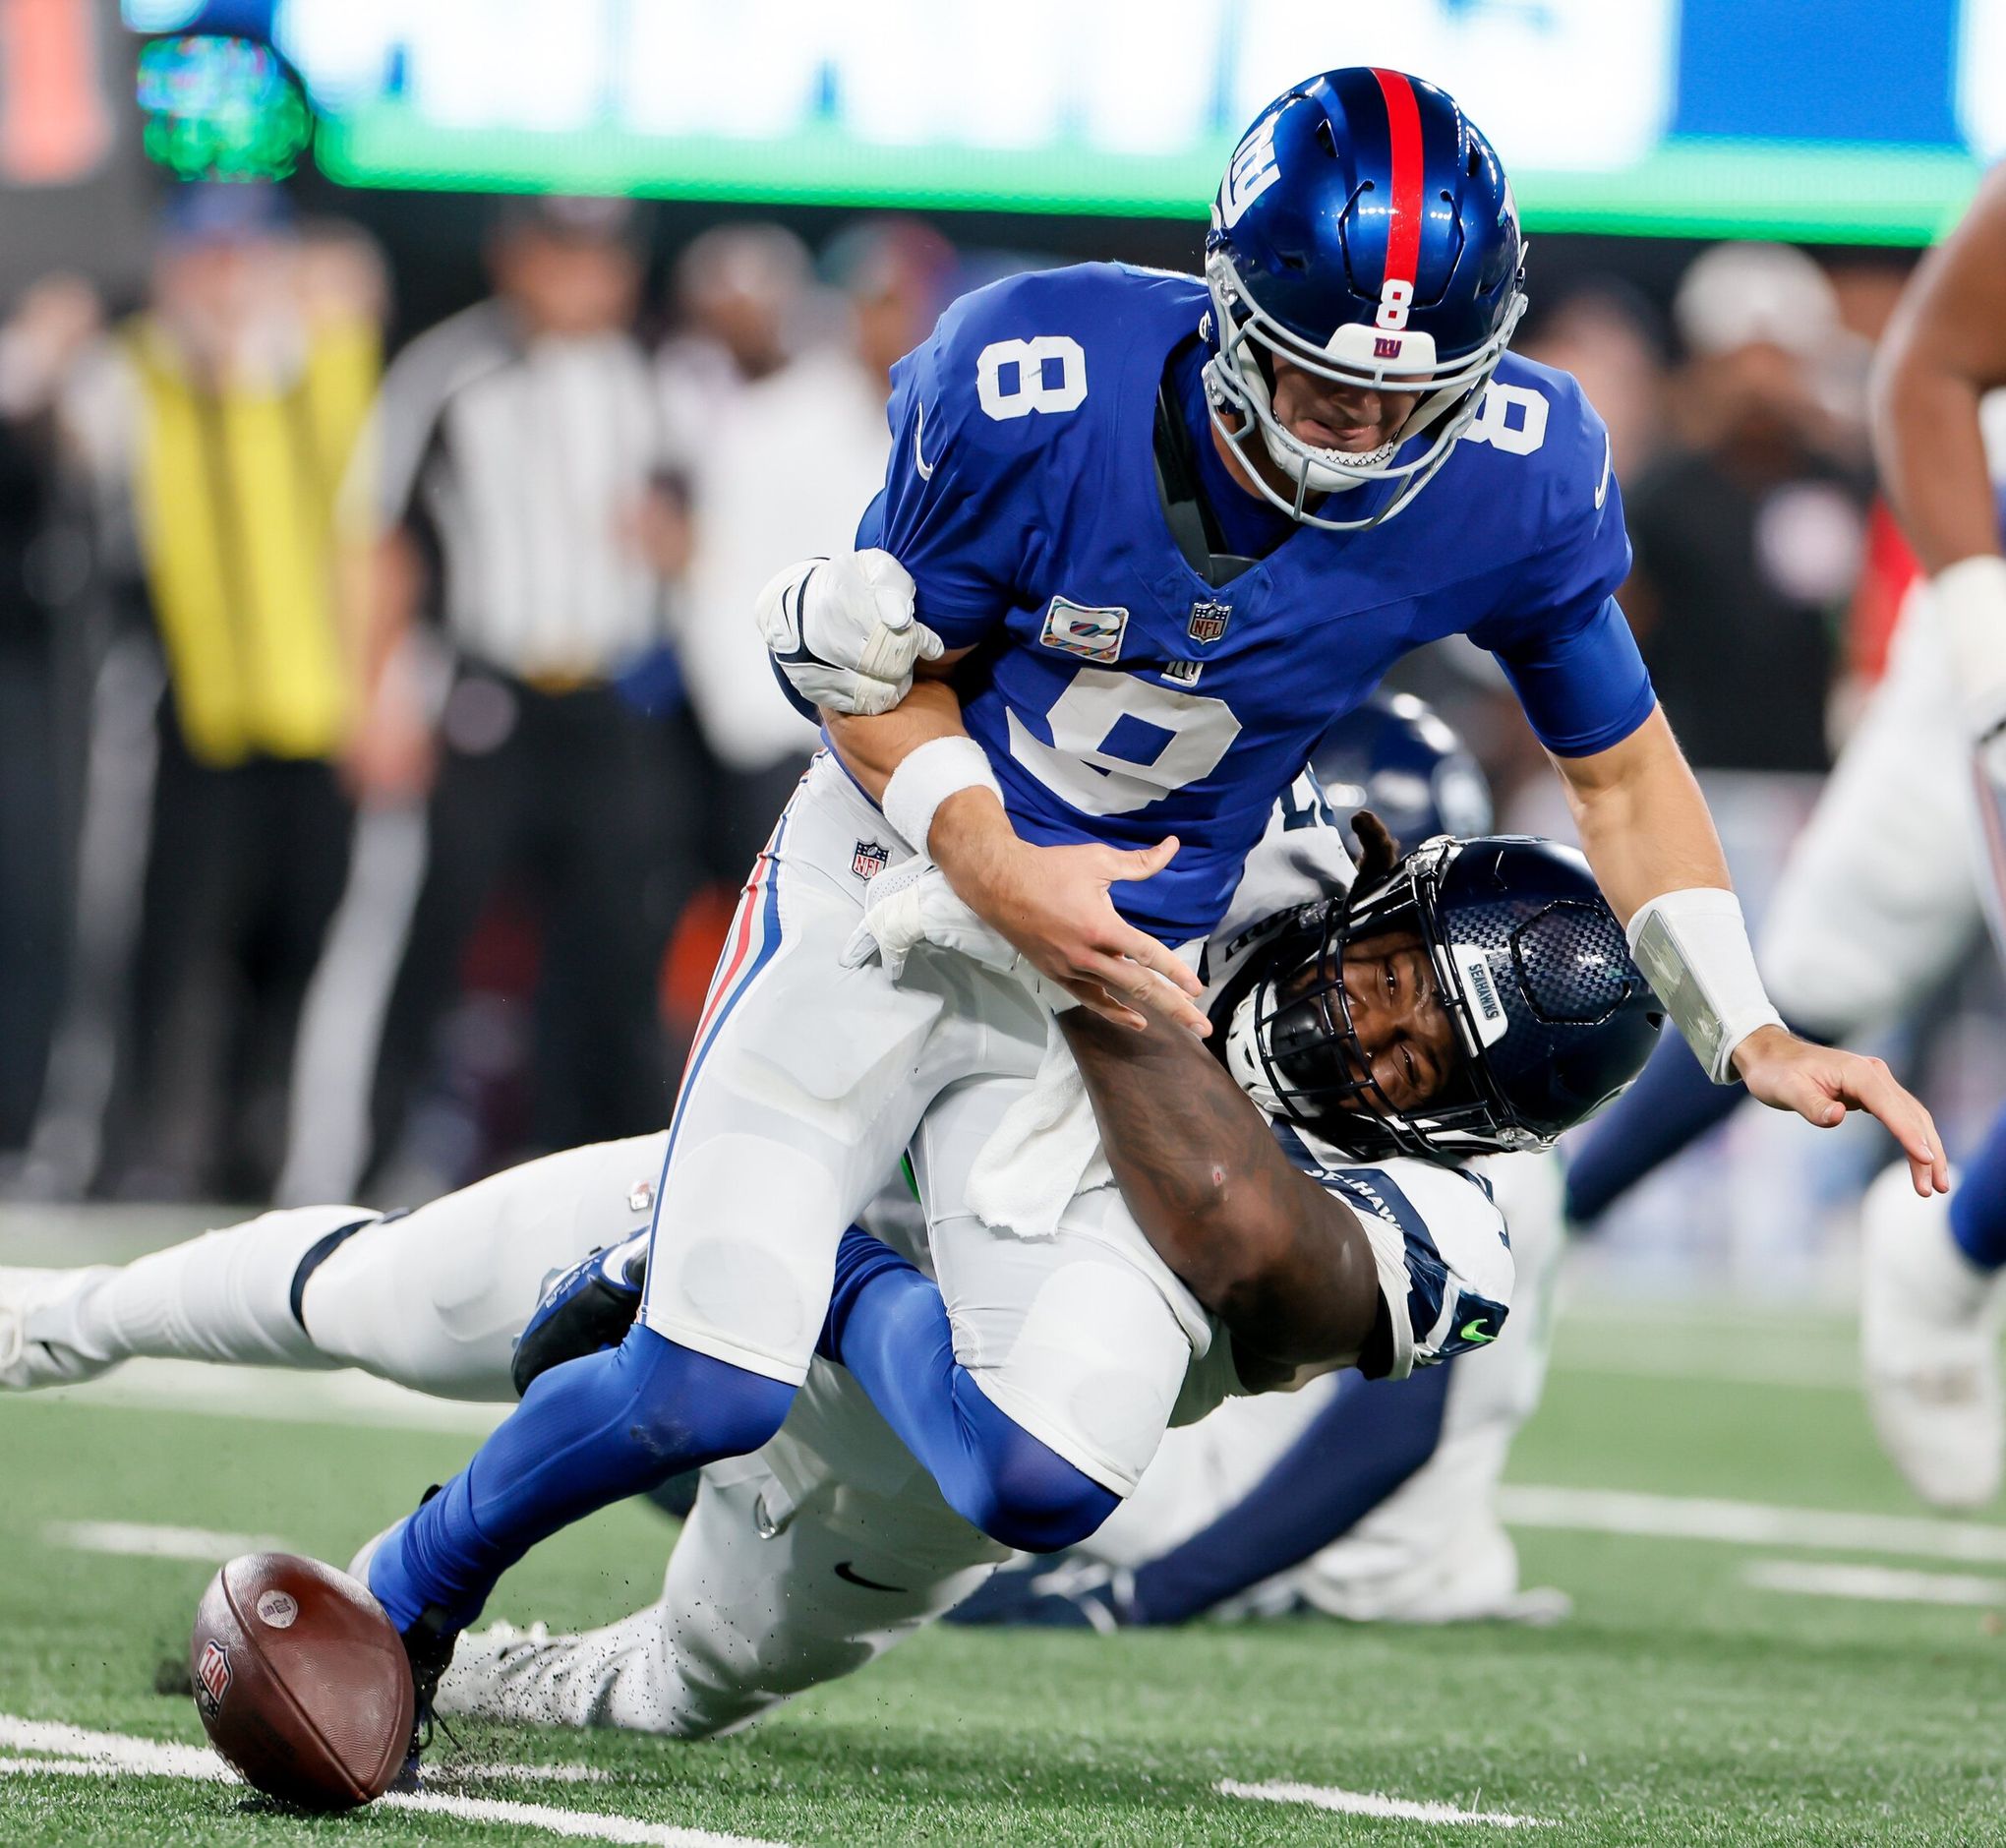 NFL Preview: Time for Giants to prove they are ready for primetime